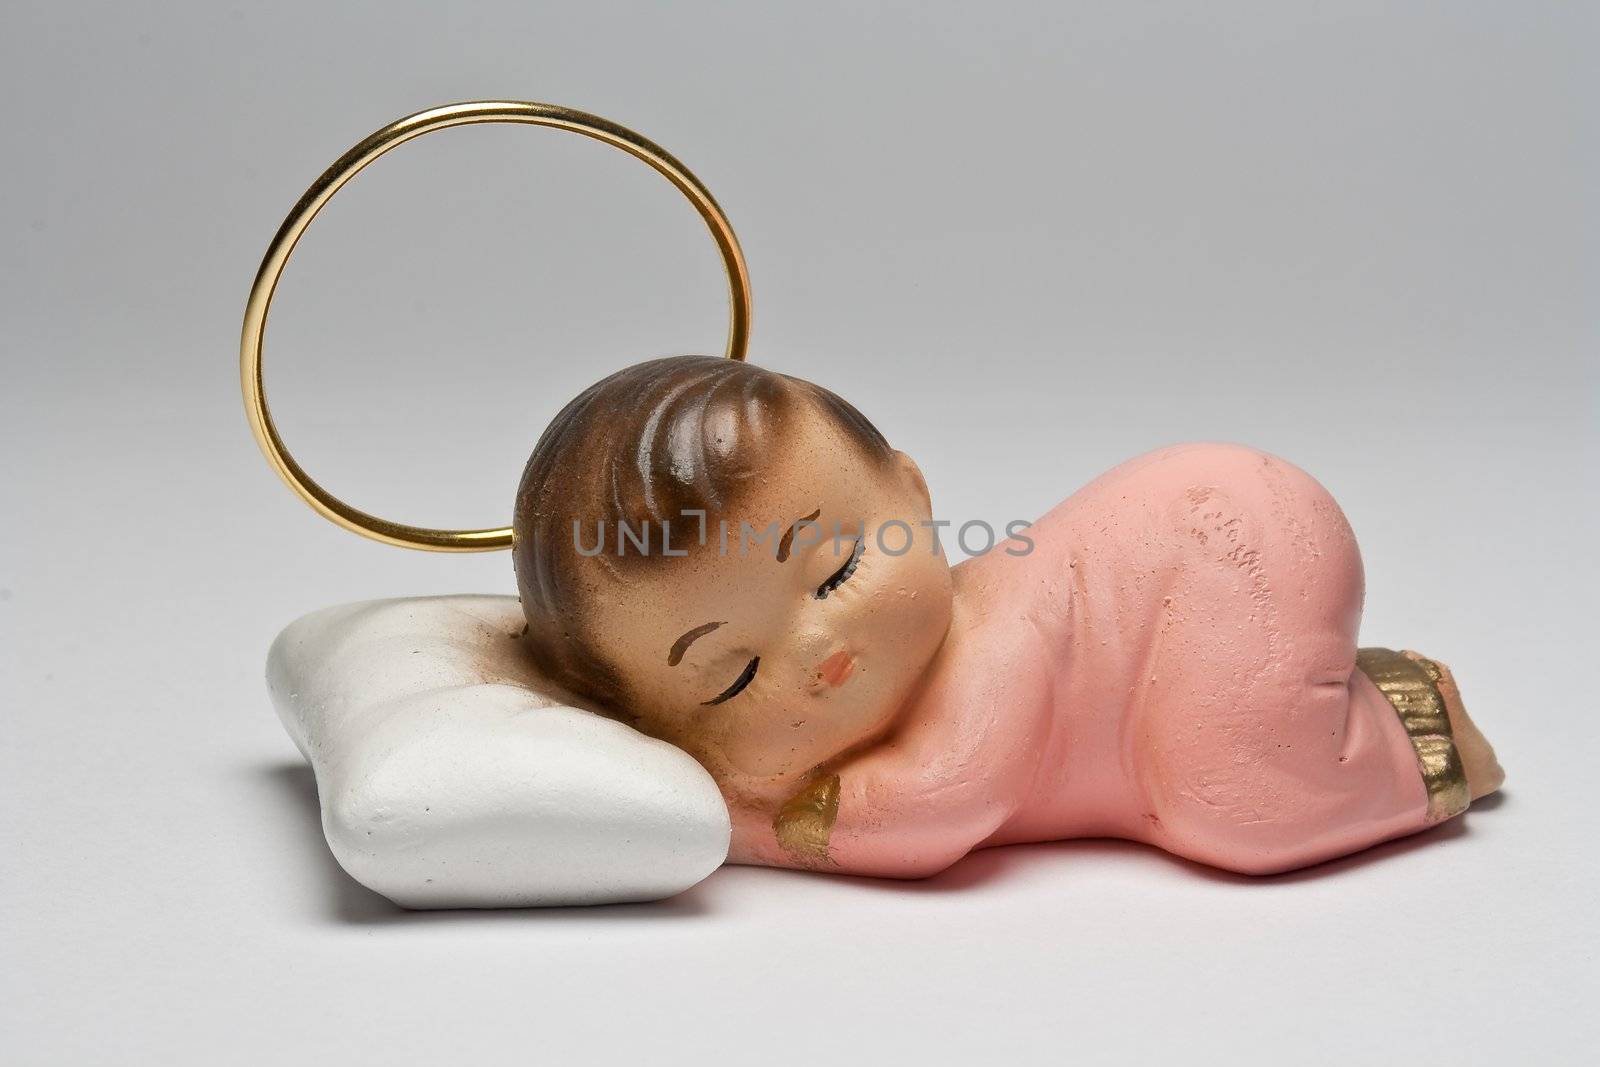 Small statue of an angel sleeping on a pillow